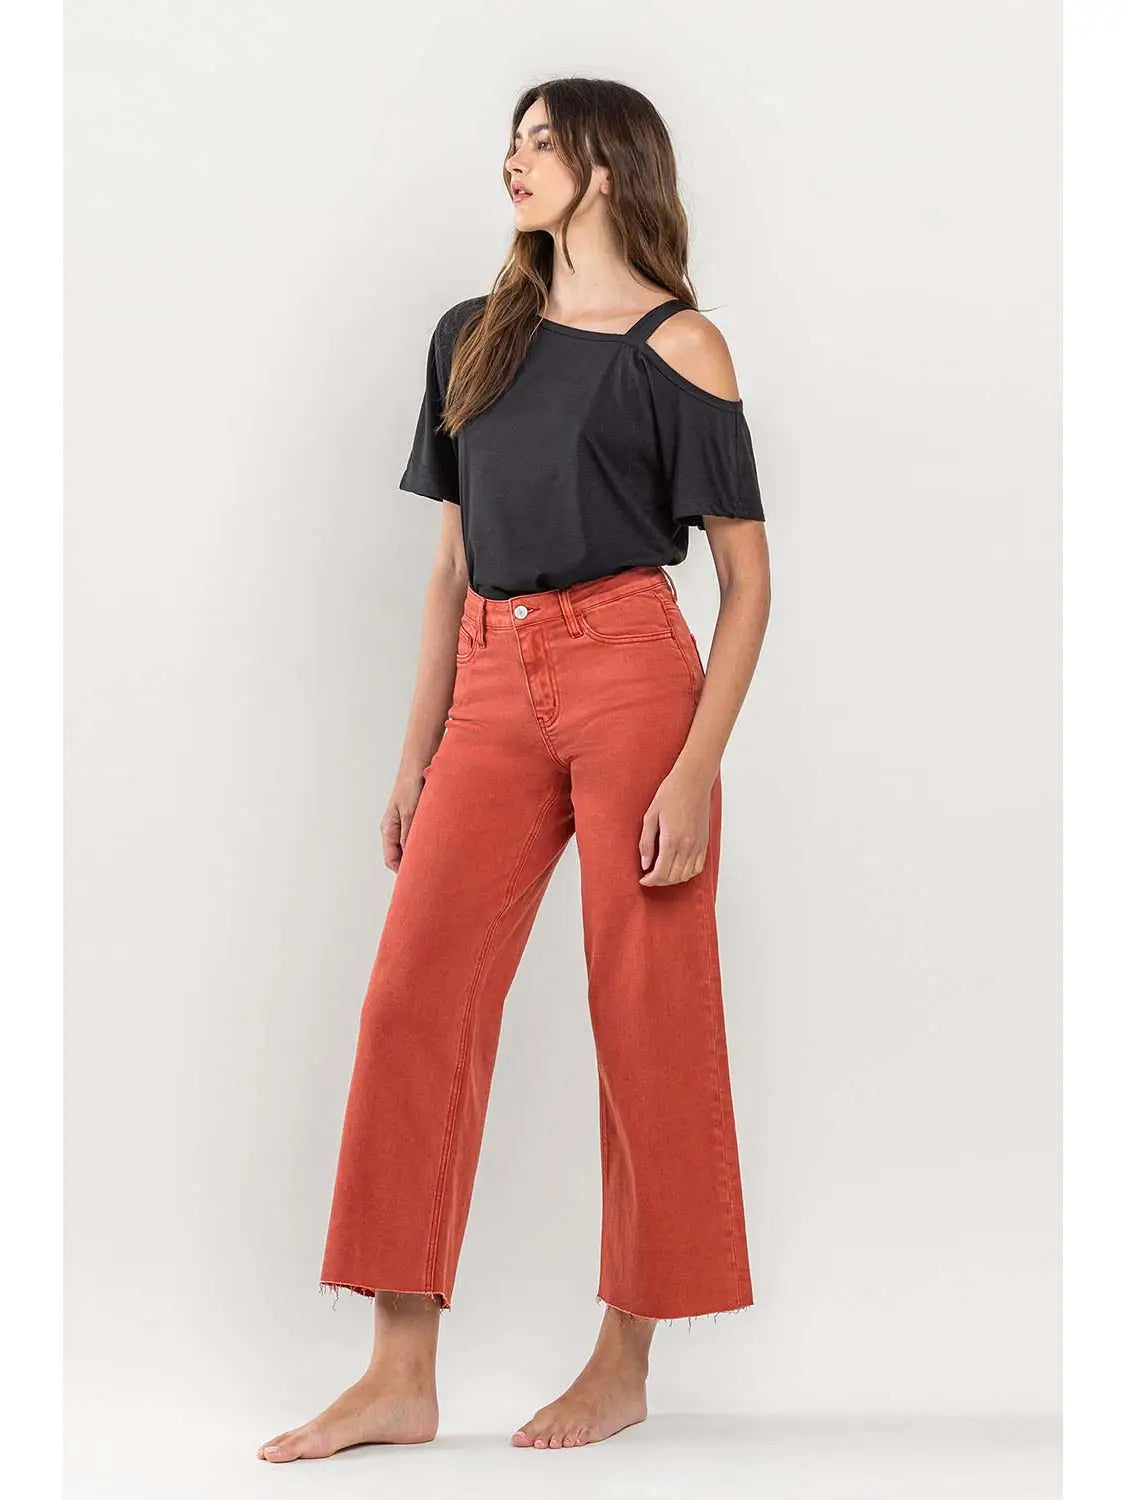 Olivia Vintage High Rise Crop Jean - Milly's Boutique